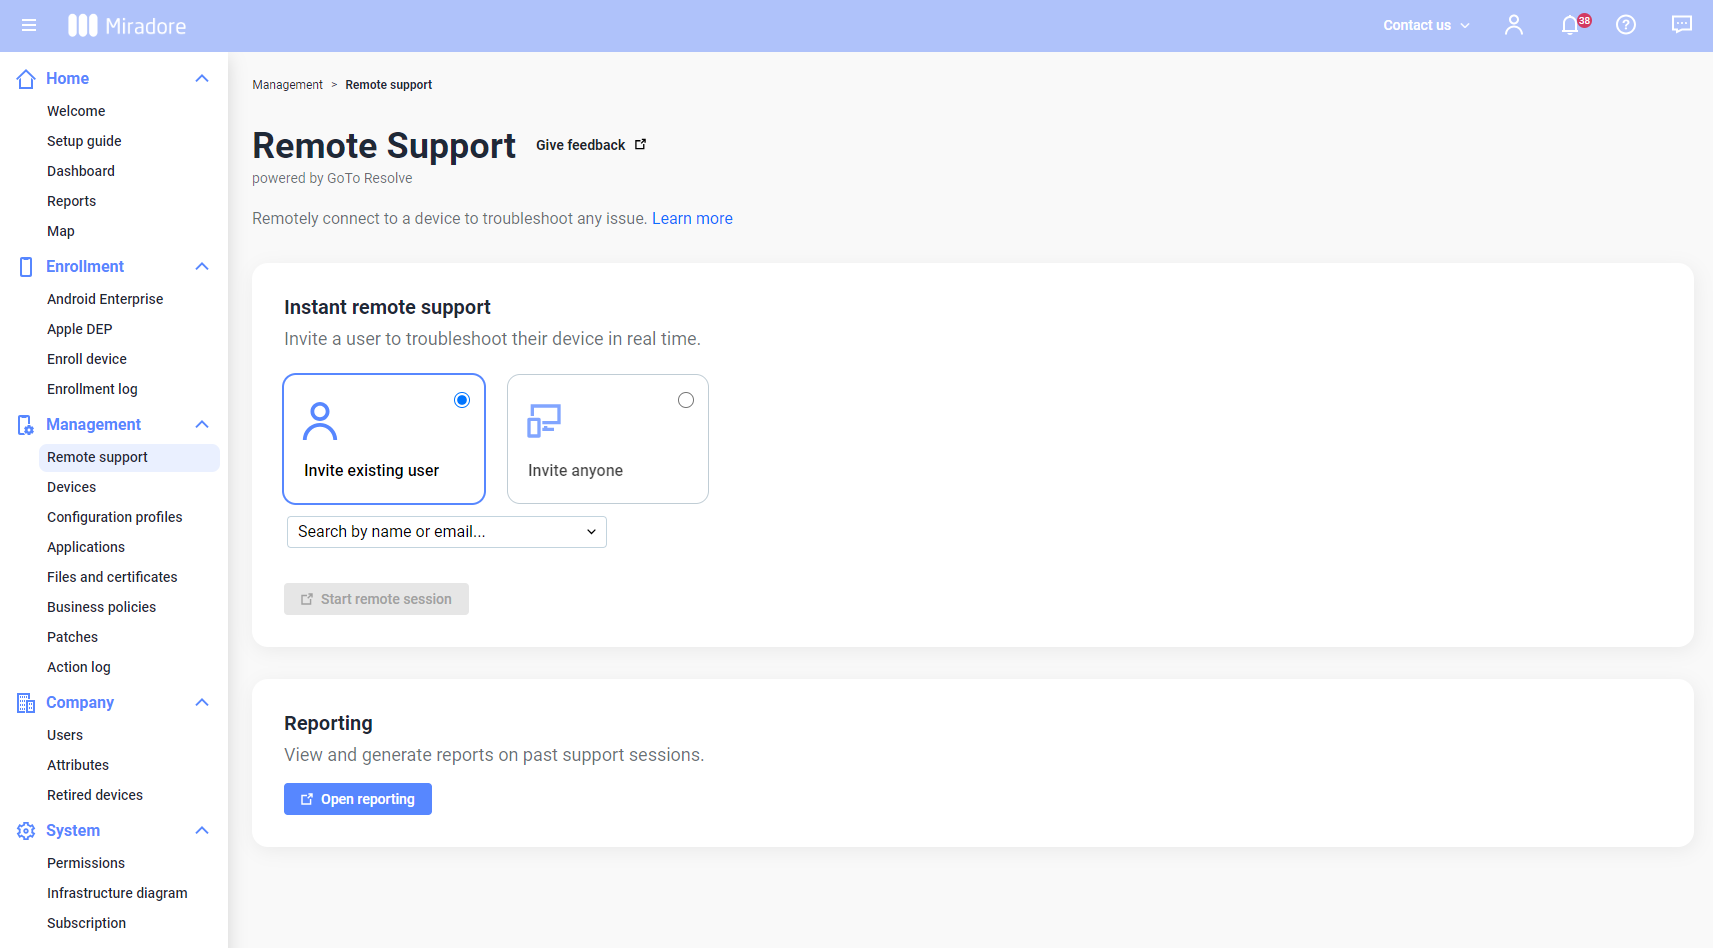 Remote Support page in Miradore